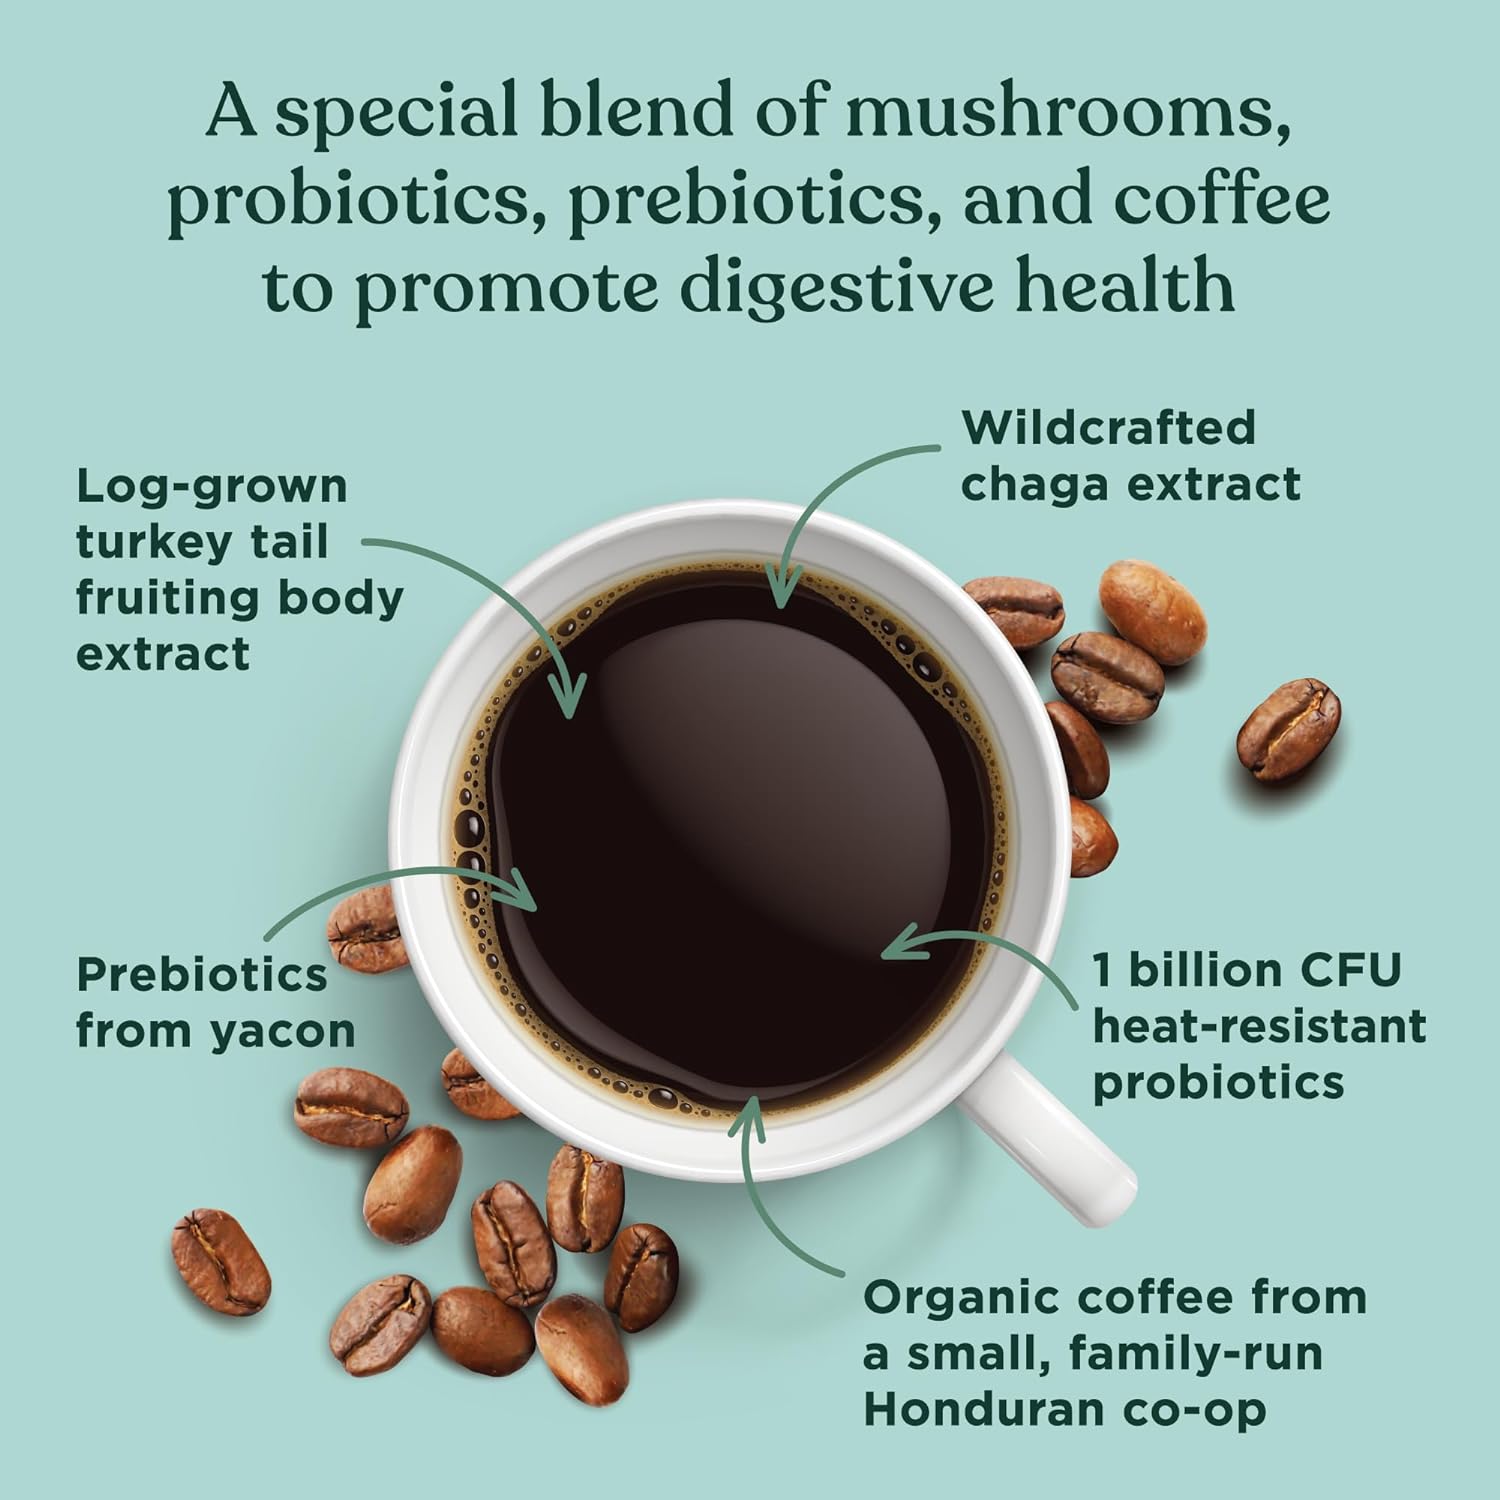 Four Sigmatic Mushroom Coffee K-Cups with Probiotic, Organic and Fair Trade Coffee, Organic and Fair Trade with Turkey Tail, Chaga, Prebiotics, CFU shelf-stable, Heat Resistant, 24 Count : Grocery & Gourmet Food